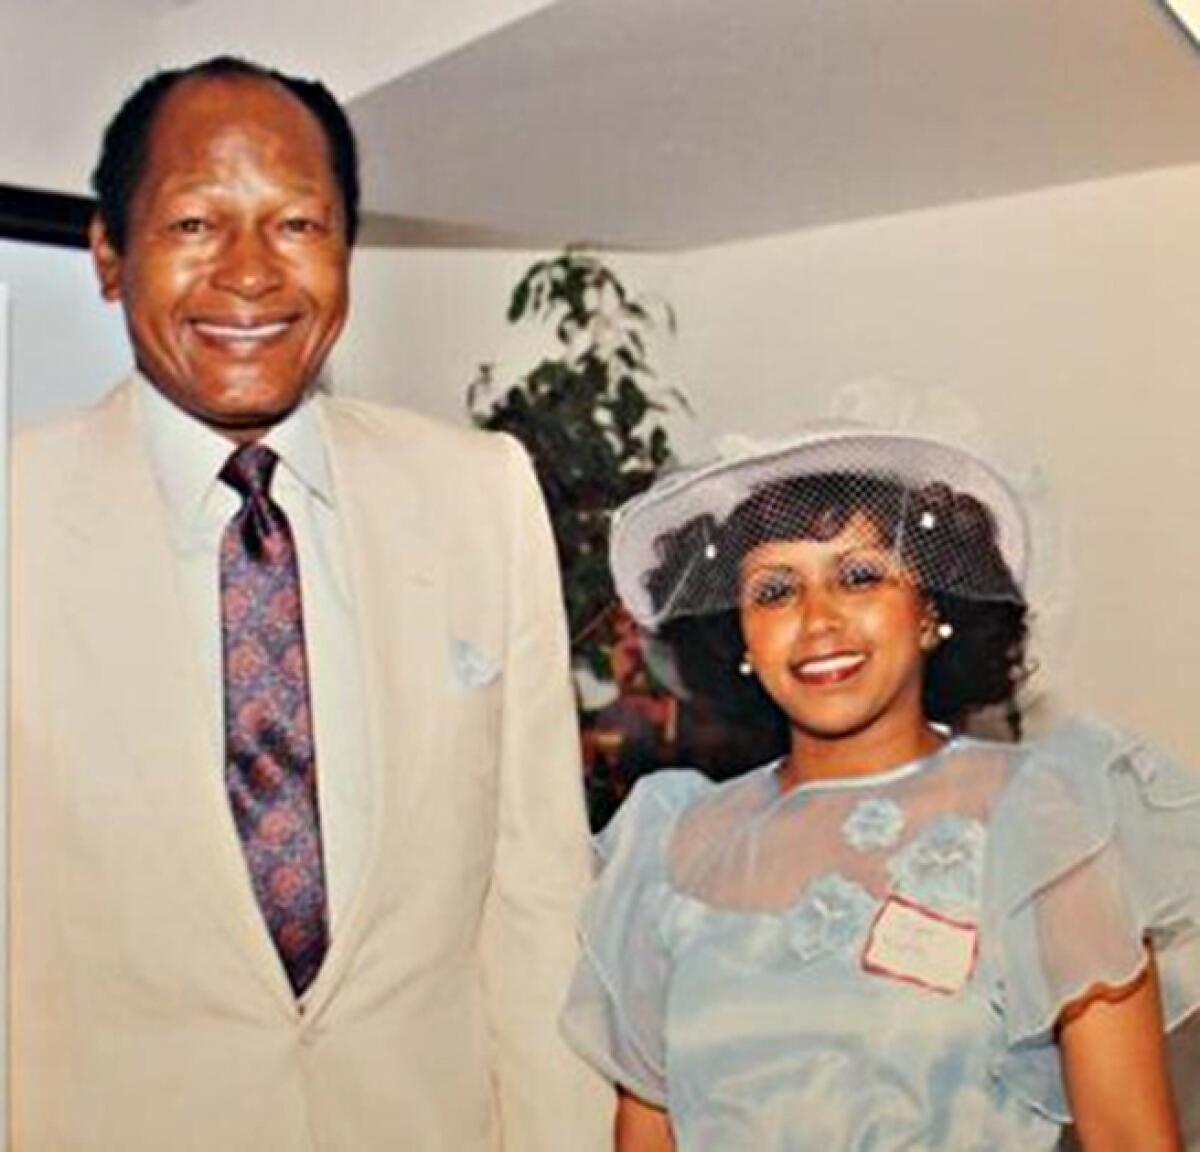 Tsega Habte, in an undated family photograph with then-Mayor Tom Bradley of Los Angeles.